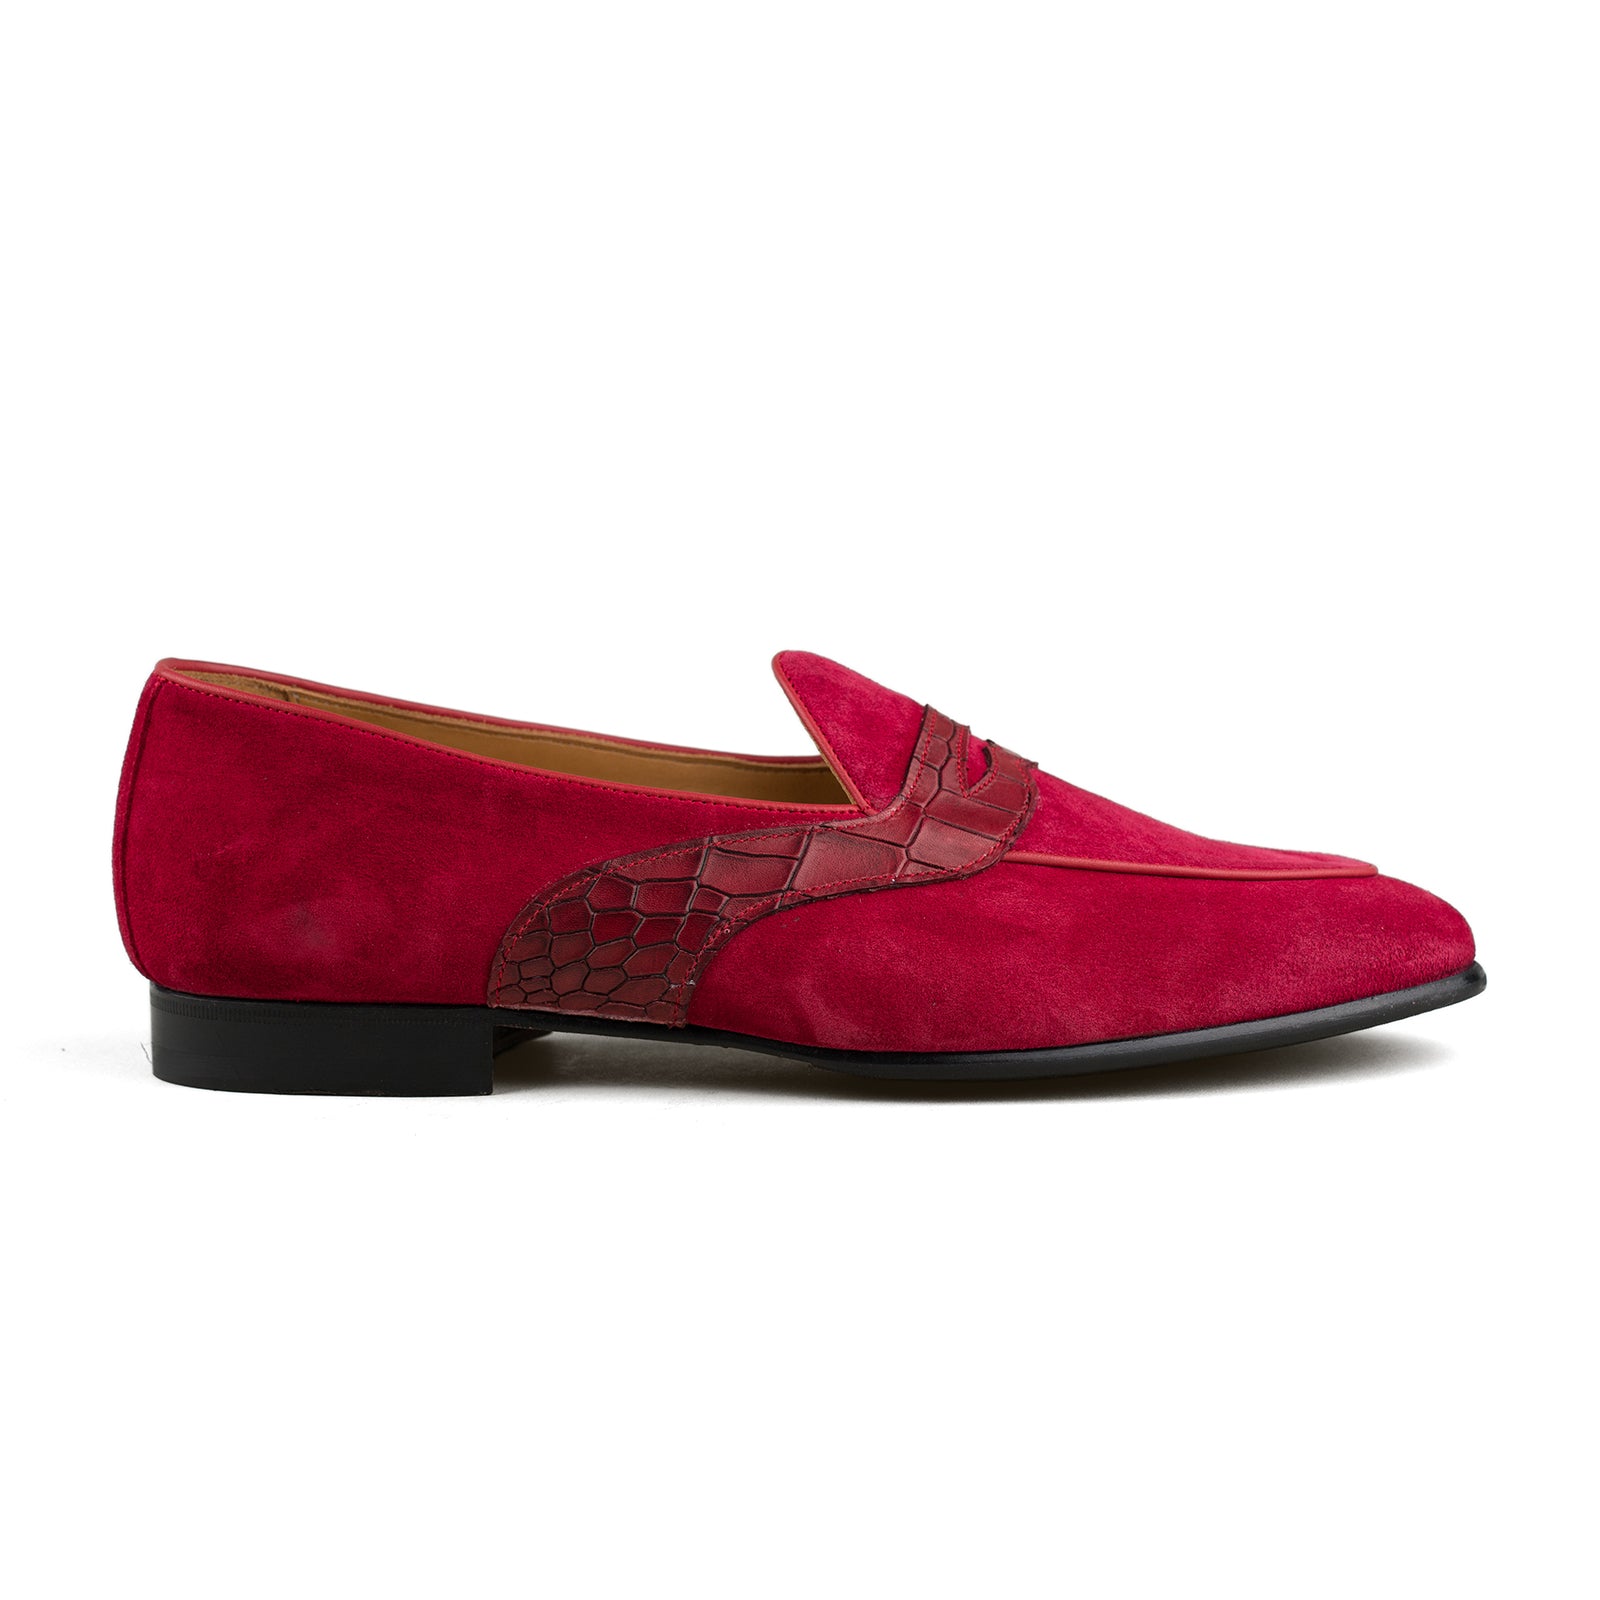 Belgian Penny Loafer - Red Suede w/ Faux Croc Strap